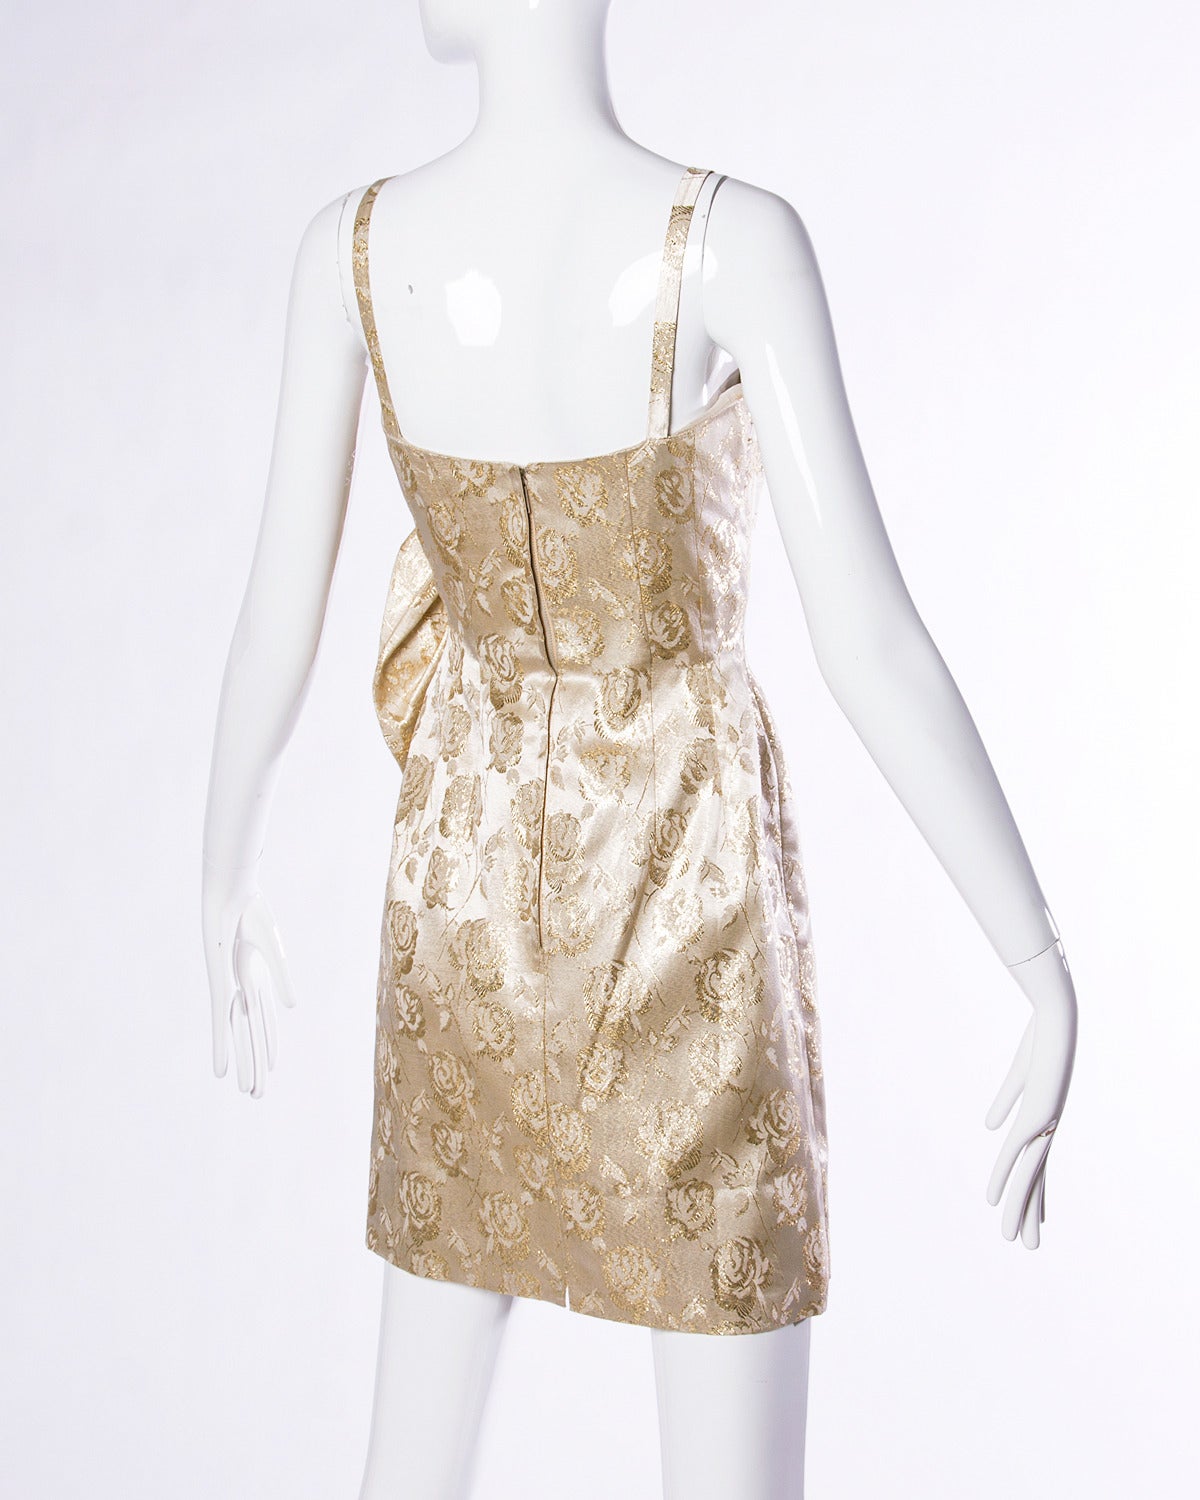 Reduced from $650. Sculptural metallic brocade cocktail dress by Lilli Diamond. Unique 